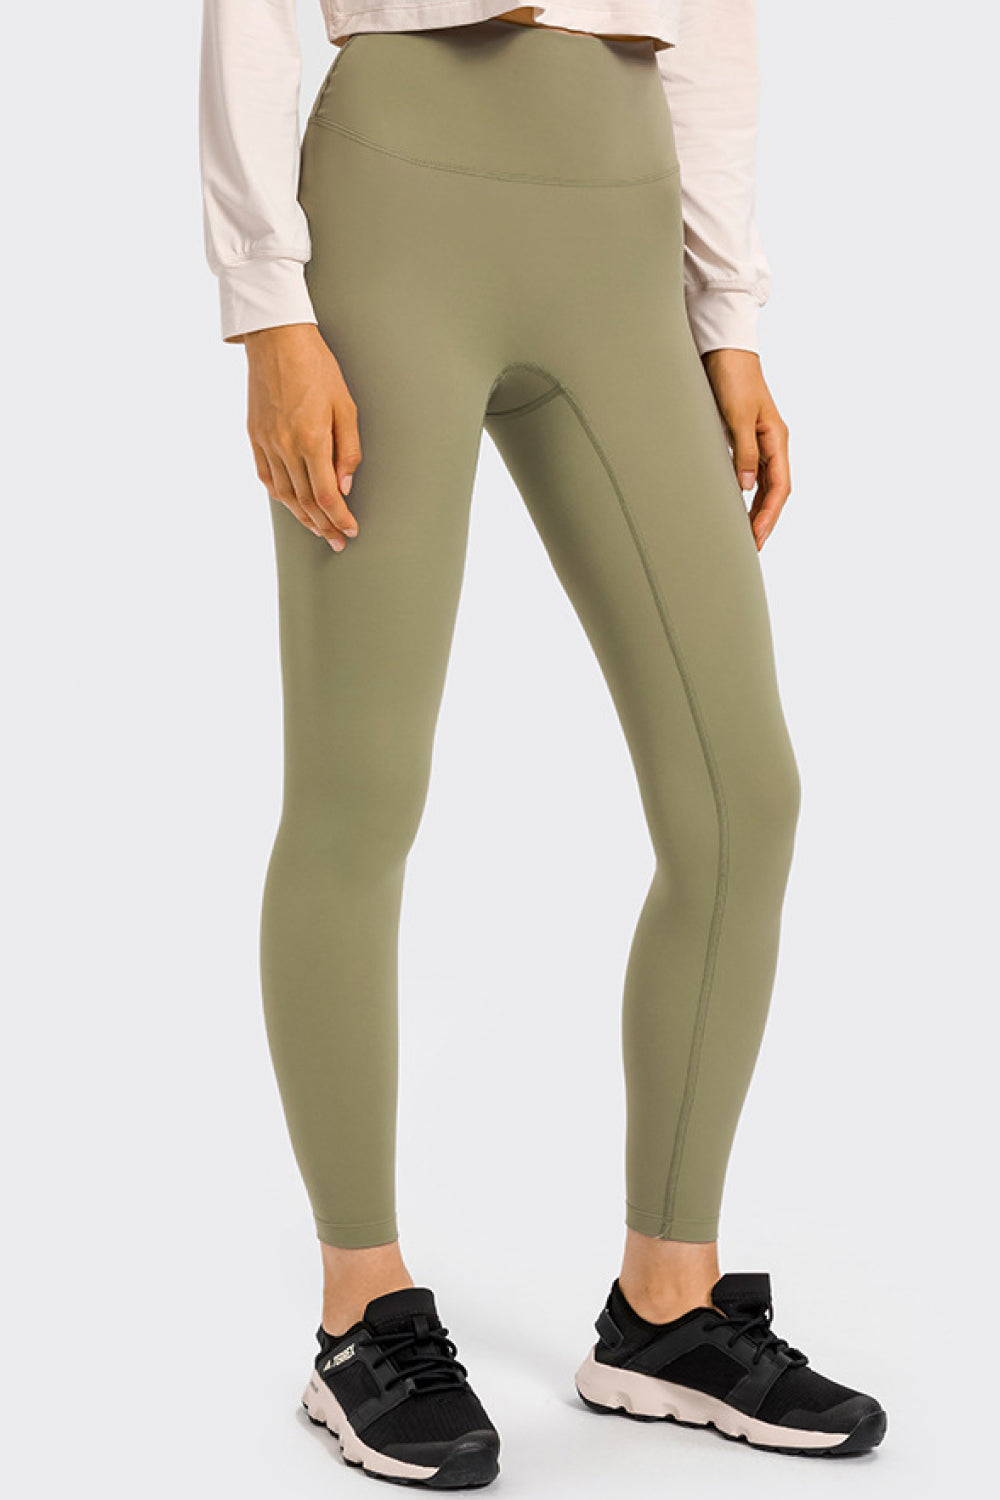 High Rise Crop Fitness Leggings High Rise Crop Fitness Leggings - M&R CORNERActivewear M&R CORNER Olive / 4